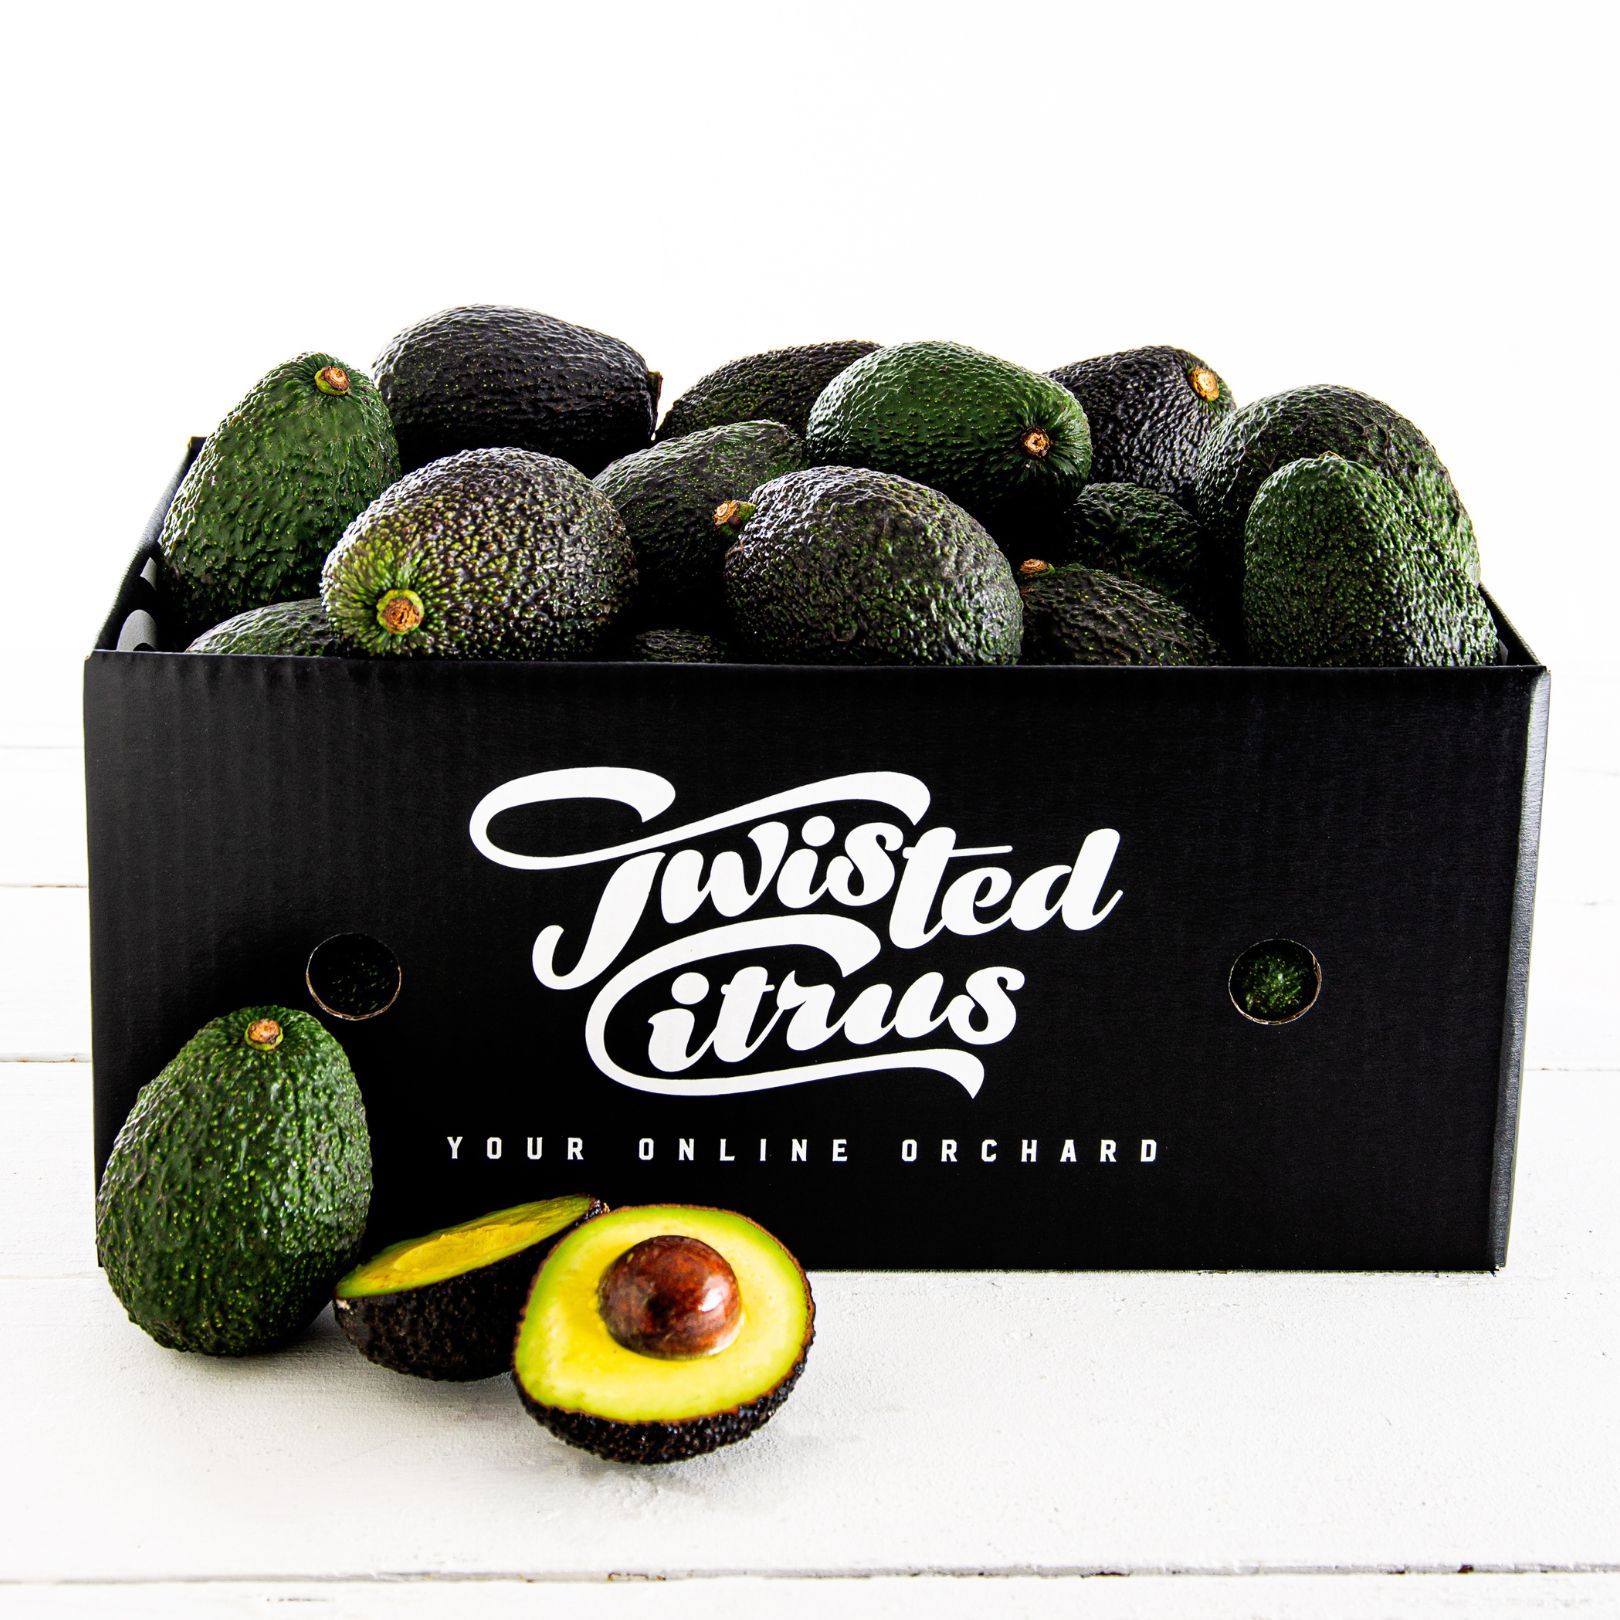 Avocados - Hass fruit box delivery nz